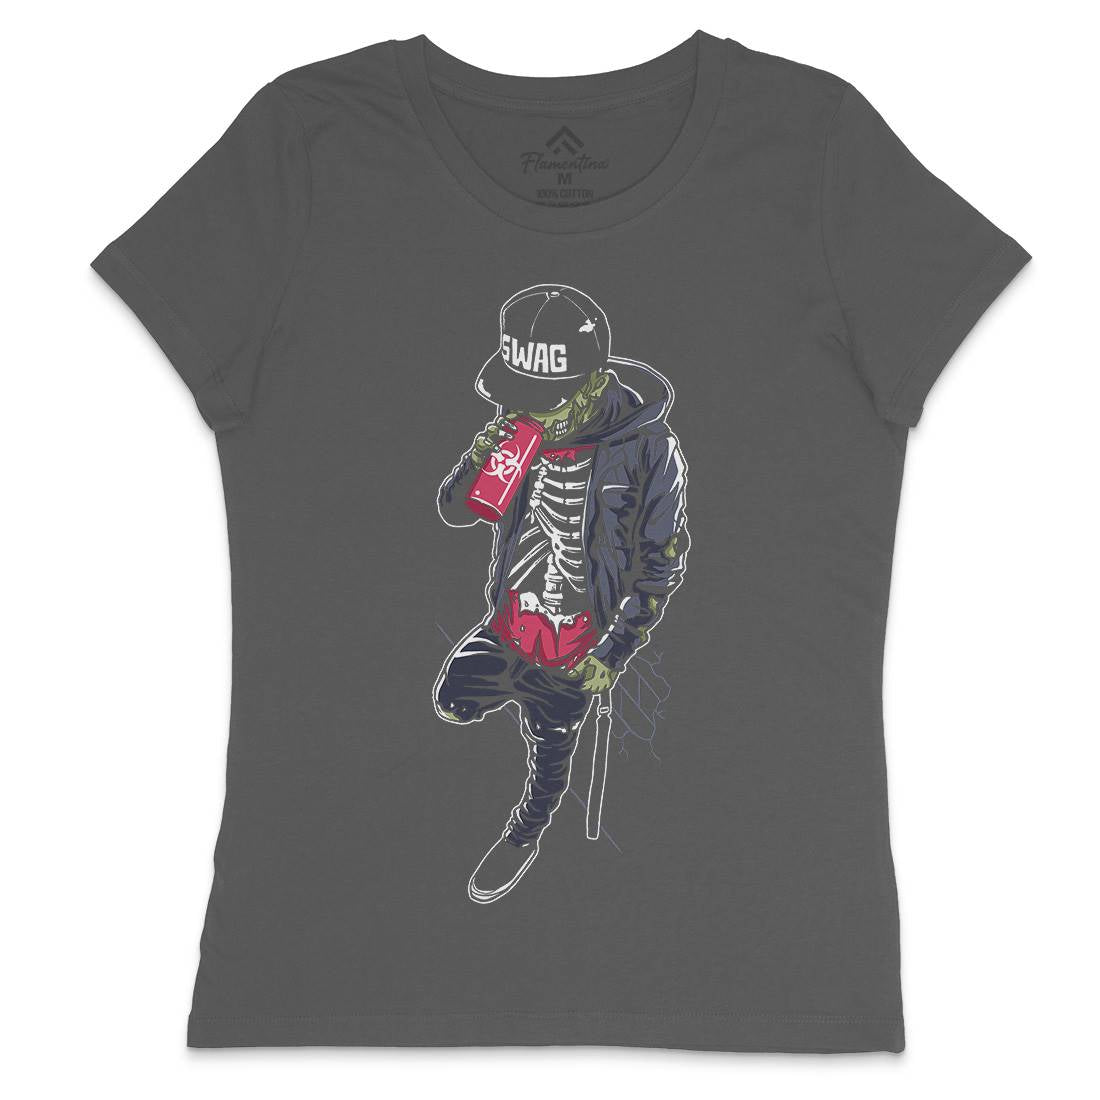 Zombie Swag Womens Crew Neck T-Shirt Horror A600